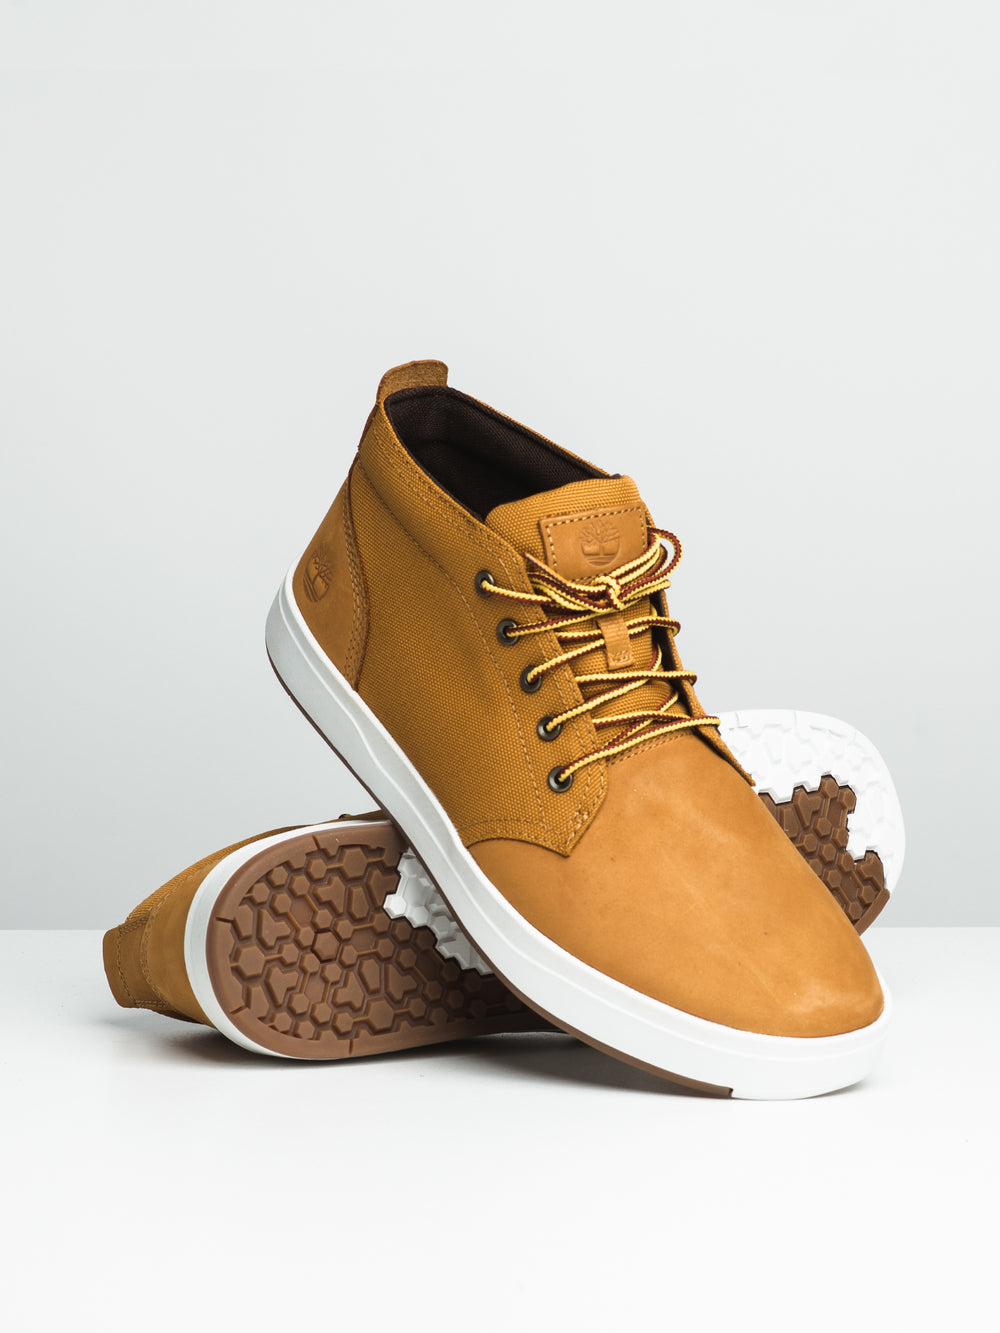 TIMBERLAND DAVIS SQUARE LEATHER CHUKKA BOOT POUR HOMME